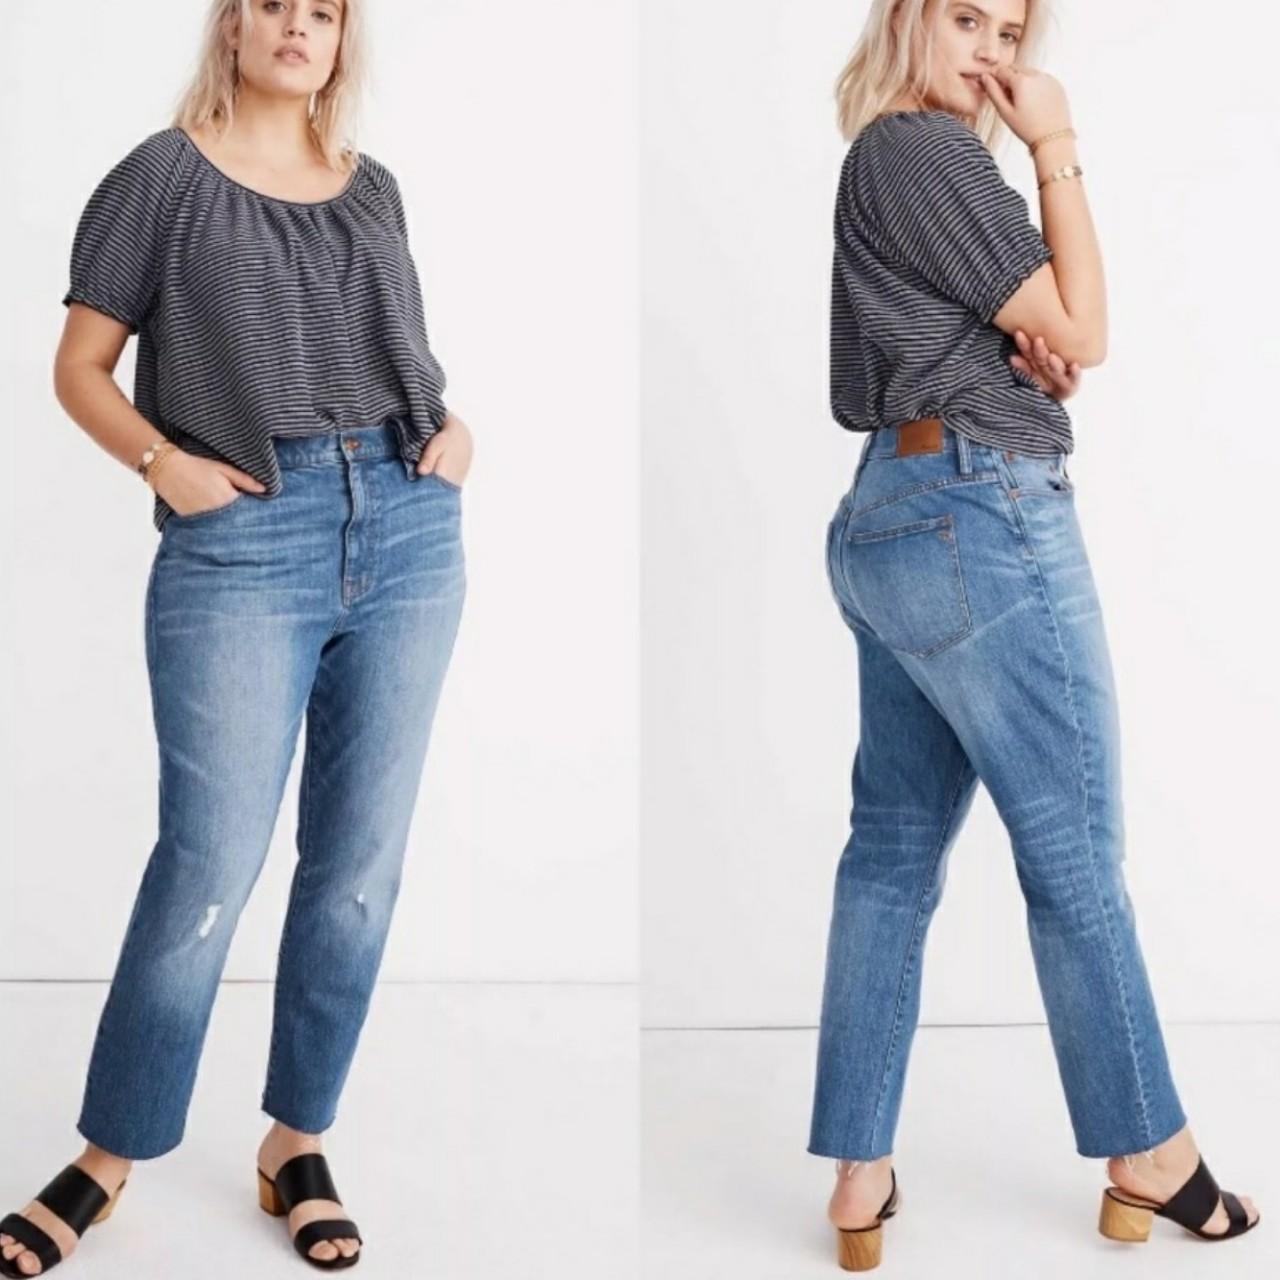 Plus Size Denim and Crop Top Outfit #plussize